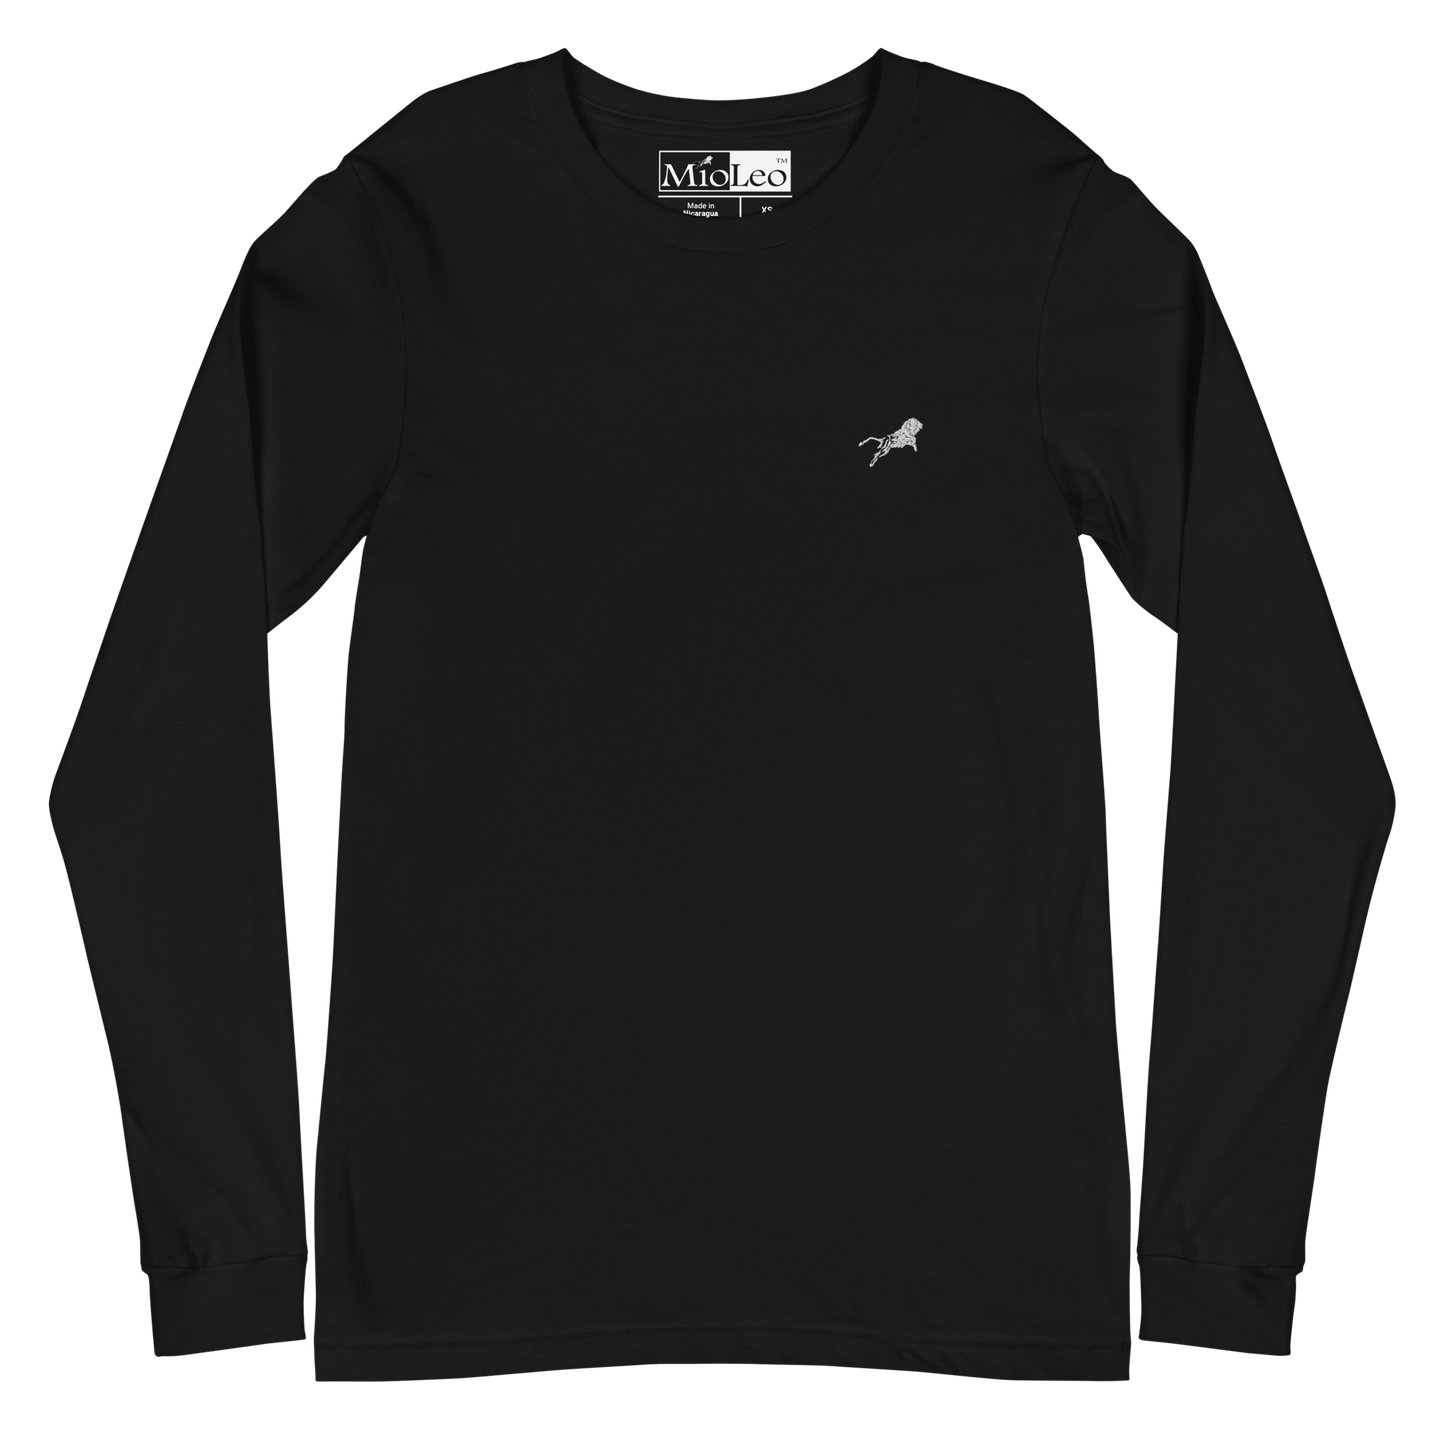 Unisex Long Sleeve - White-Line No.001-2 "unlimited" by MioLeo